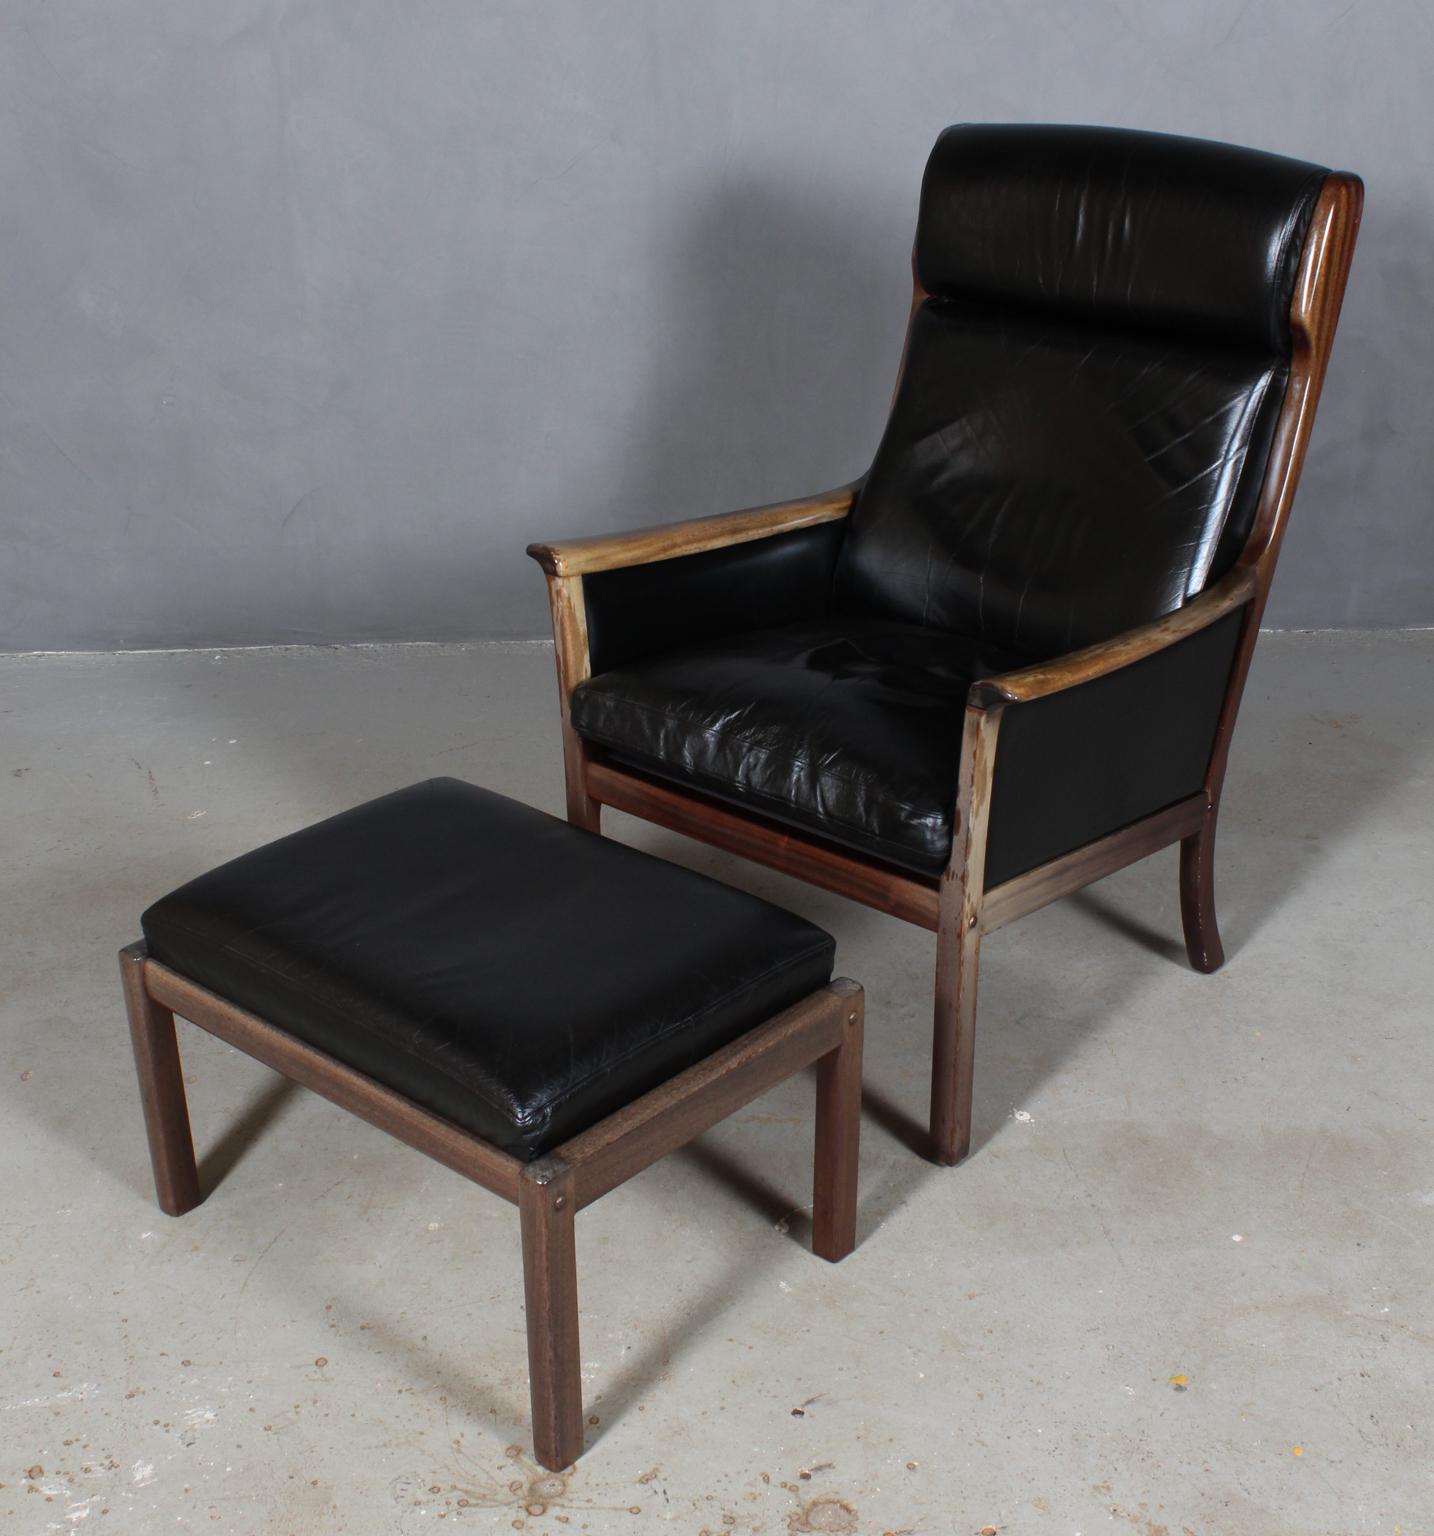 Ole Wanscher lounge chair with ottoman. Frame in solid mahogany.

Cushions in patinated black leather.

Probably made by Poul Jeppesen in the 1960s.